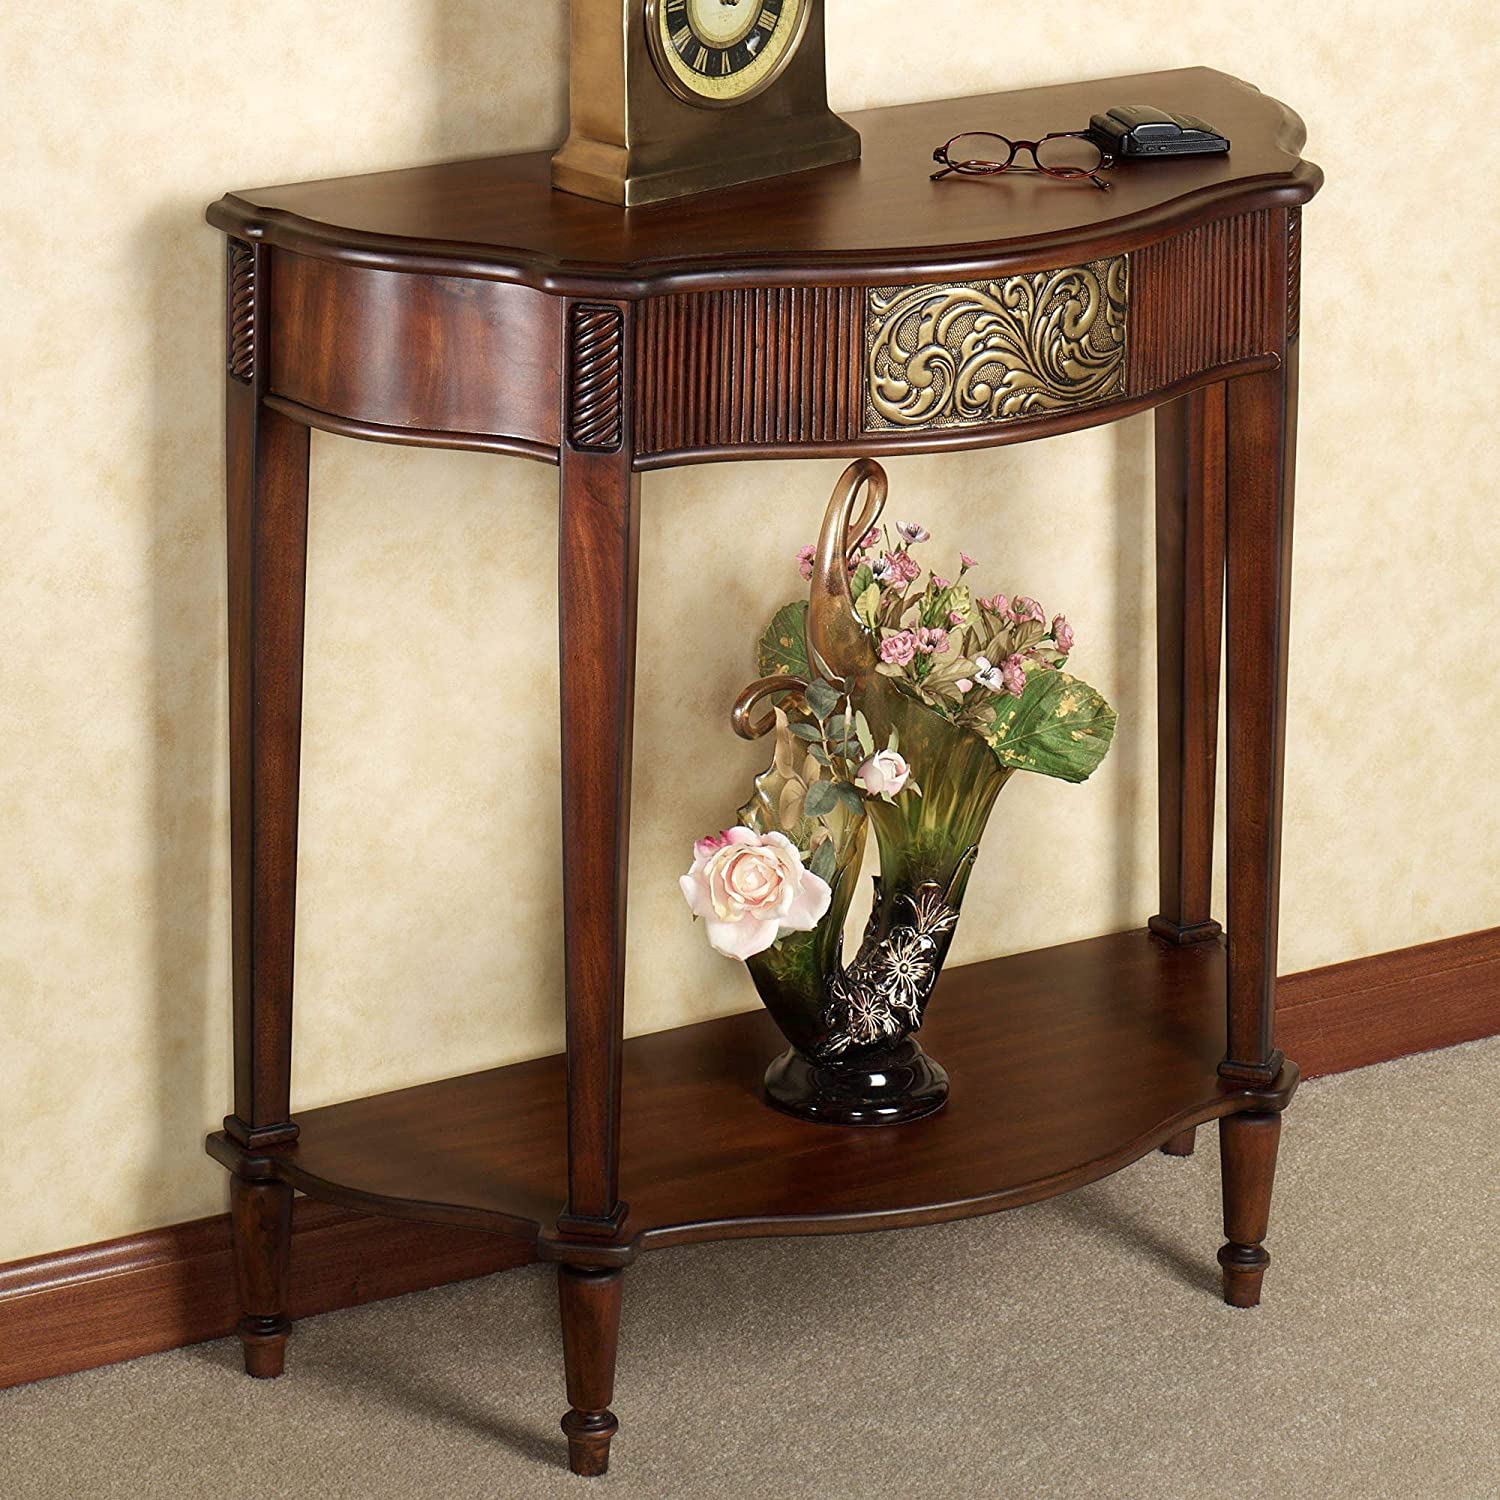 Wooden Console Table Natural Cherry s - Traditional Decorative Regal Furniture -  - Elegant Display for Entryway Room